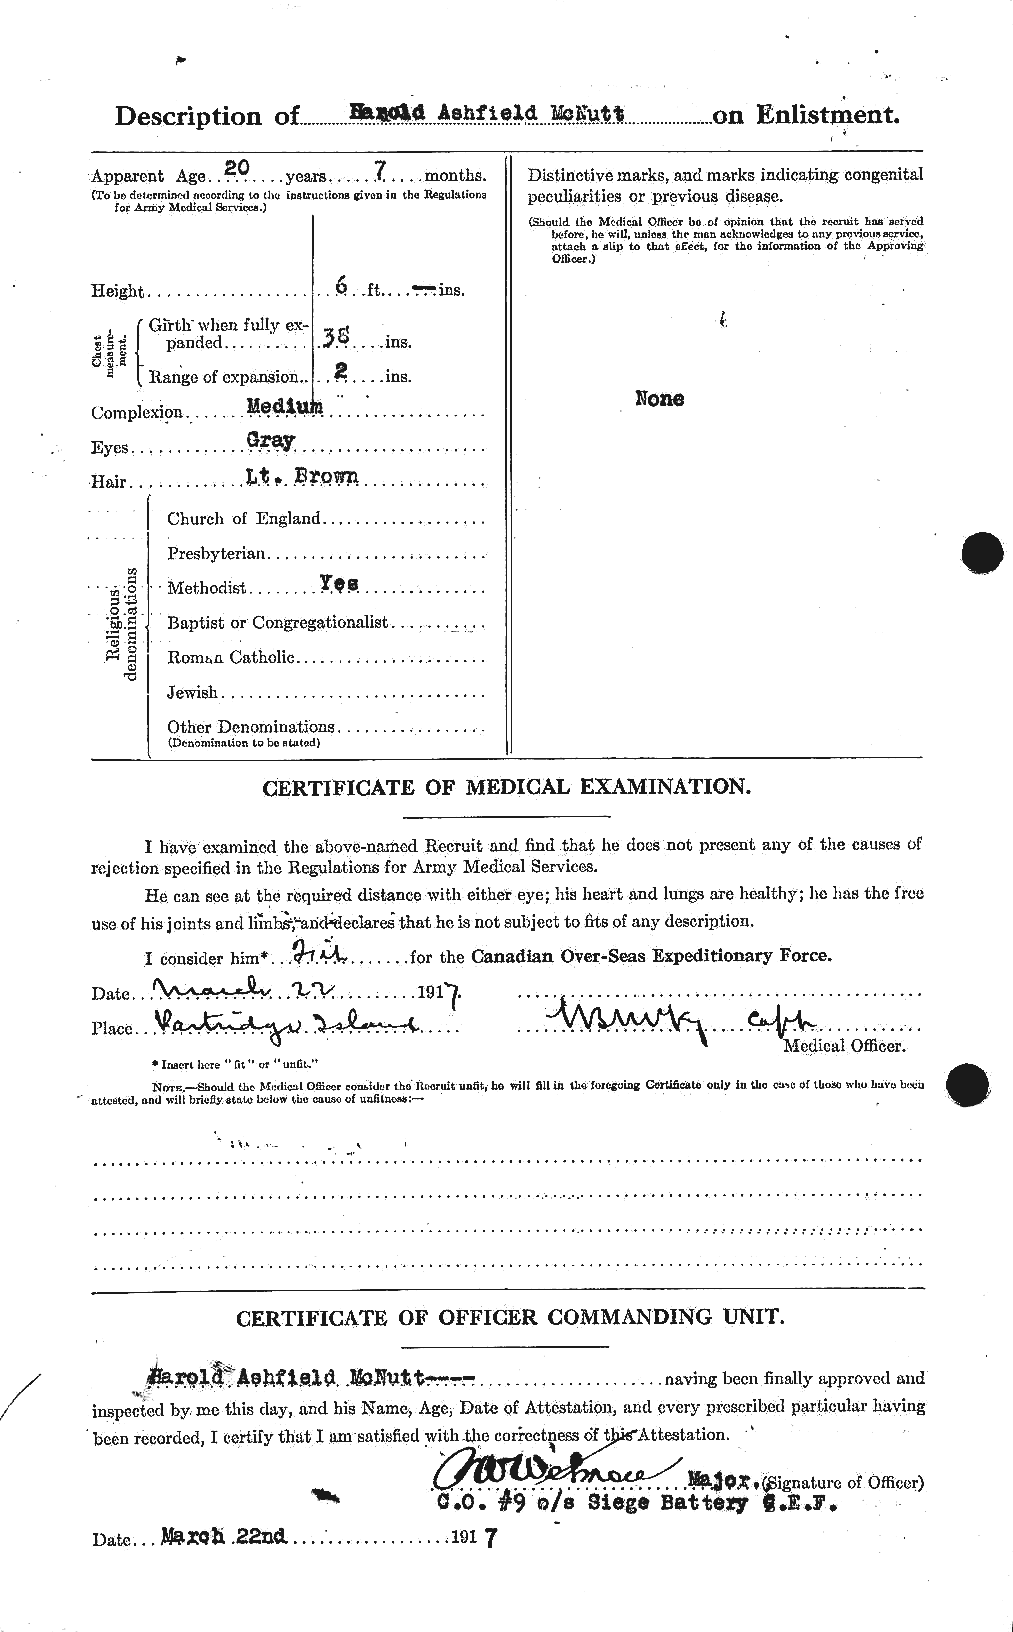 Personnel Records of the First World War - CEF 541990b